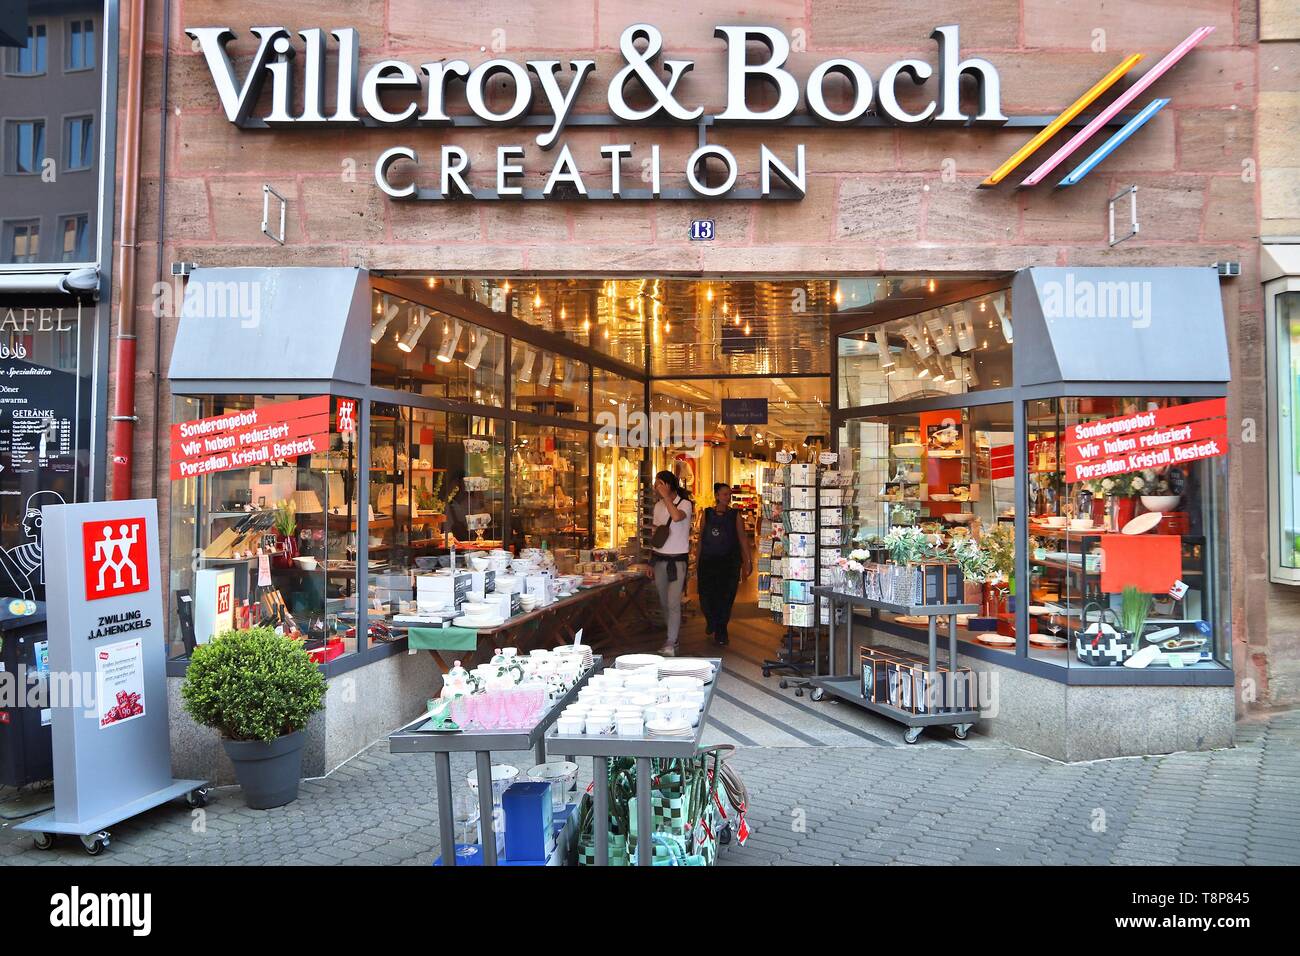 NUREMBERG, GERMANY - MAY 7, 2018: Villeroy and Boch kitchenware brand store in Nuremberg, Germany. Villeroy & Boch is a large ceramics manufacturing c Stock Photo